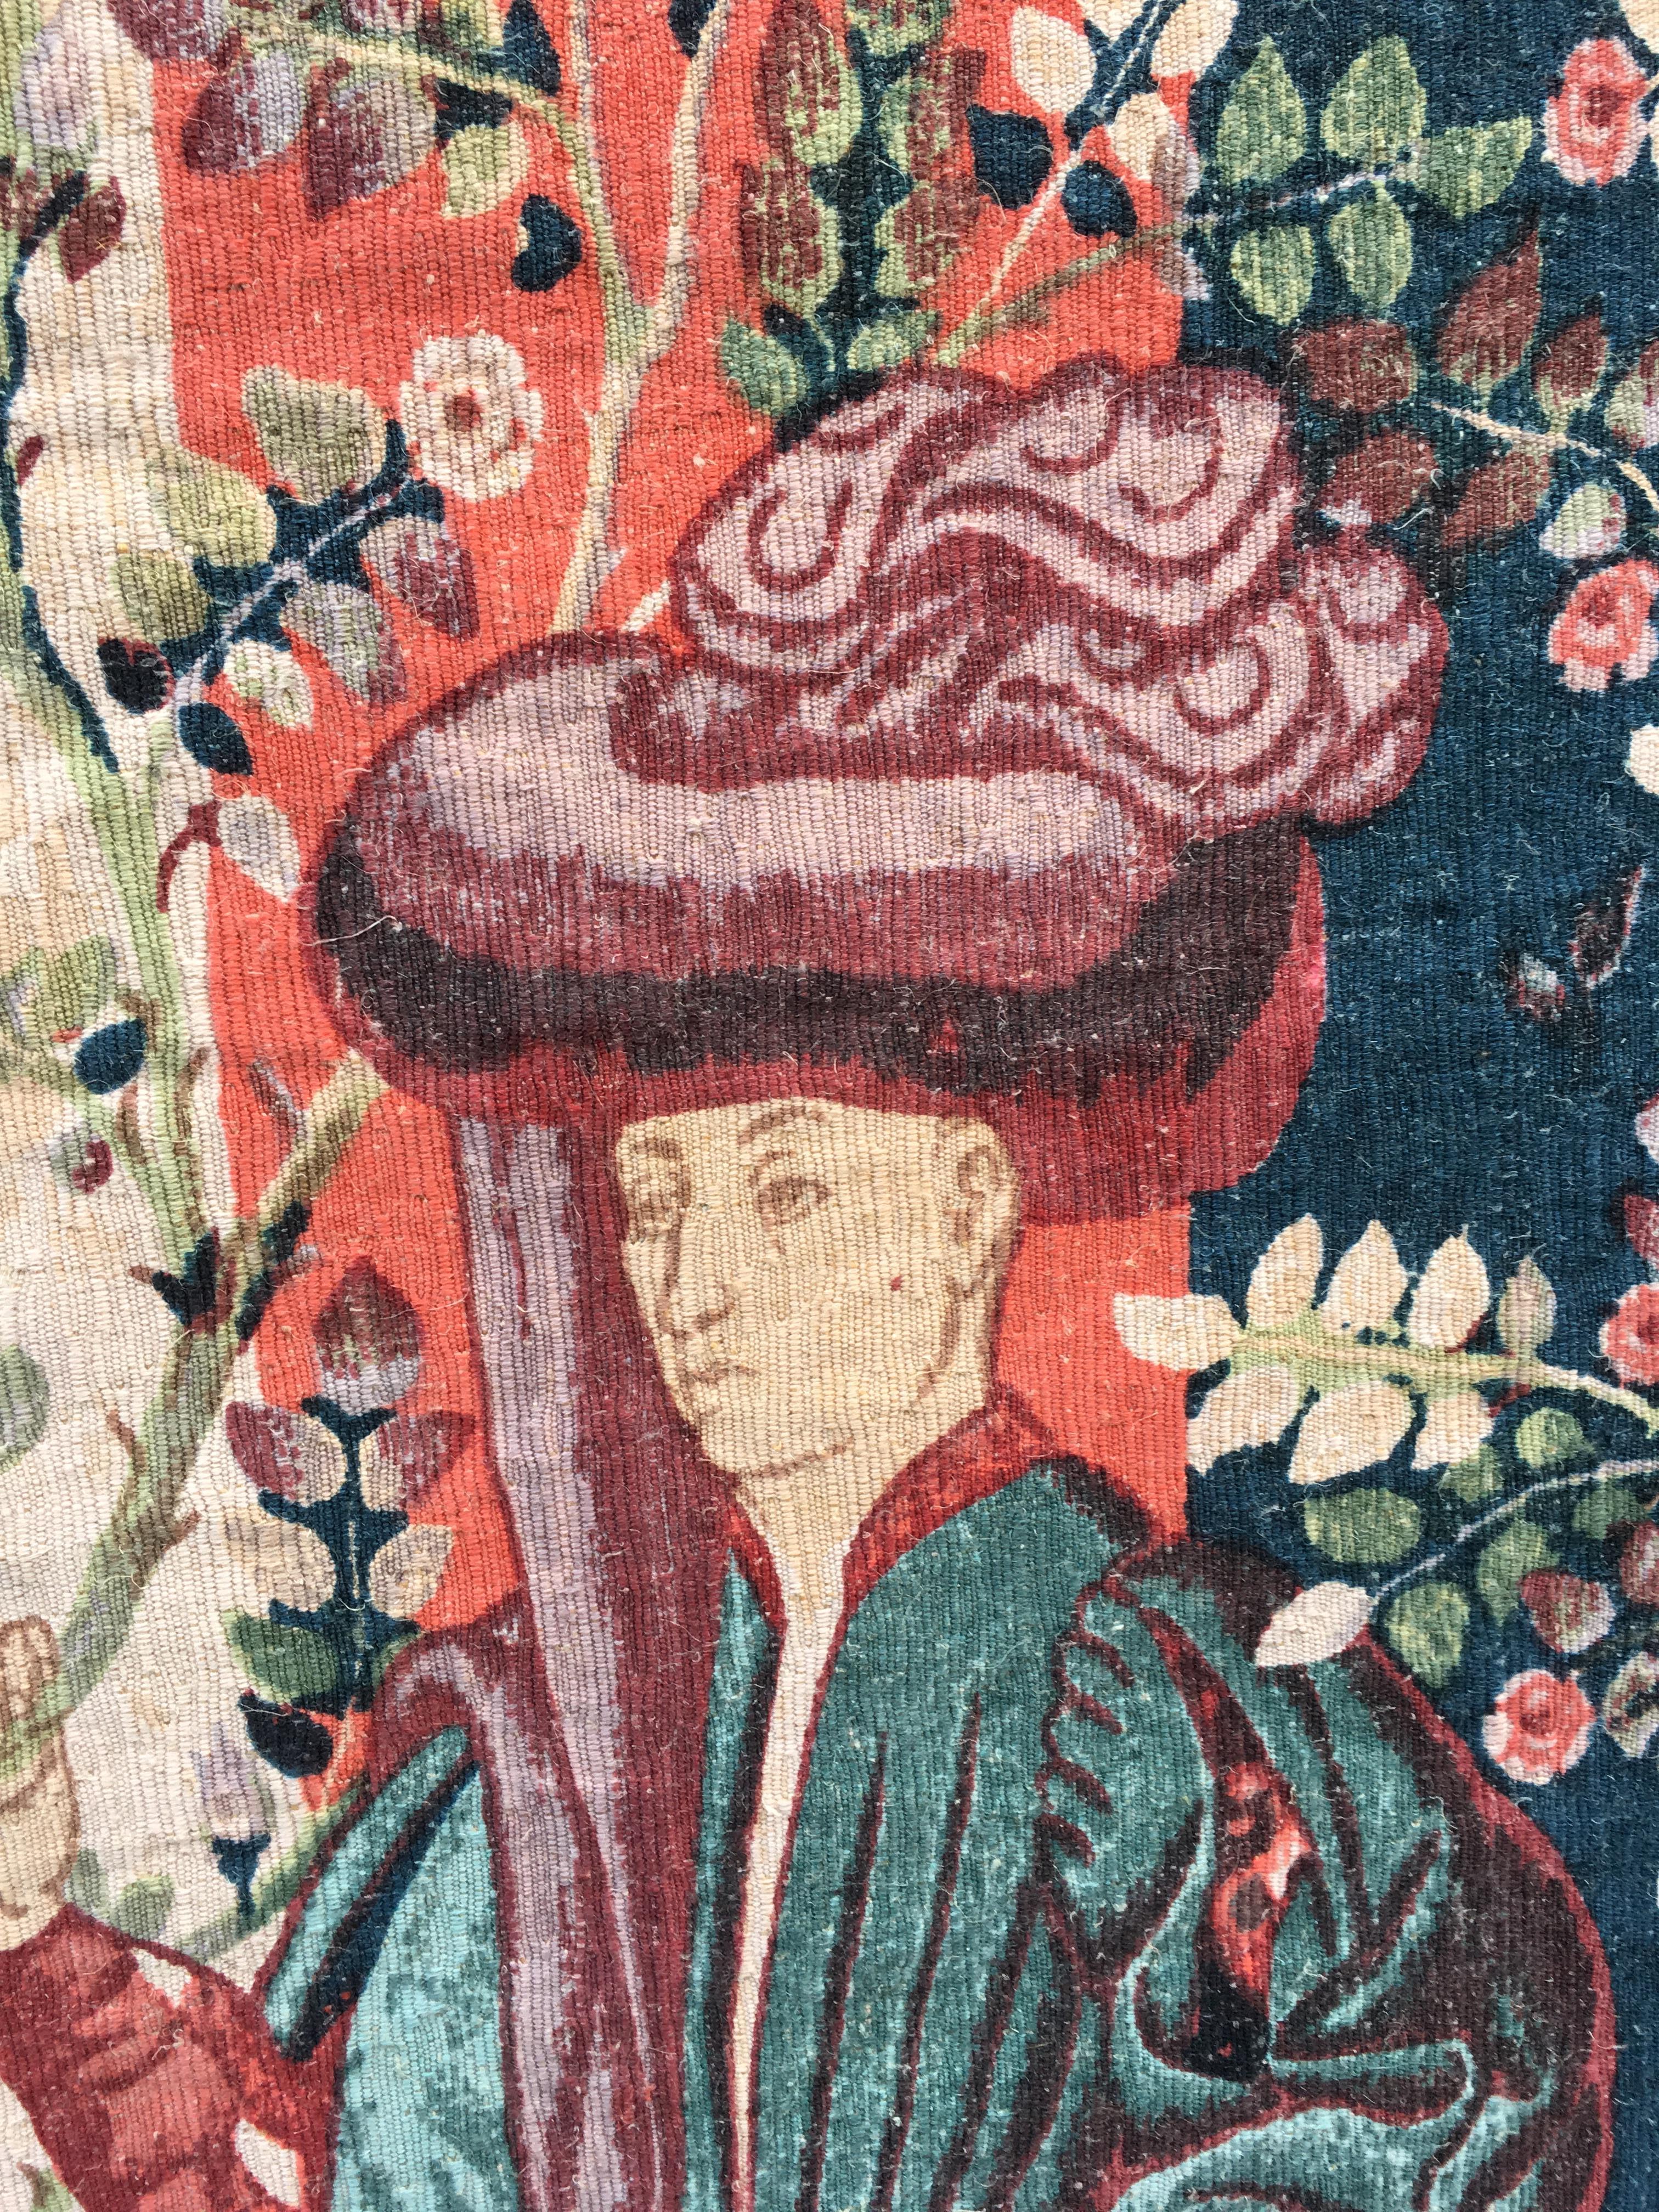 Renaissance Manufacture Robert Four, Printed Tapestry after a 16th Century Tapestry For Sale